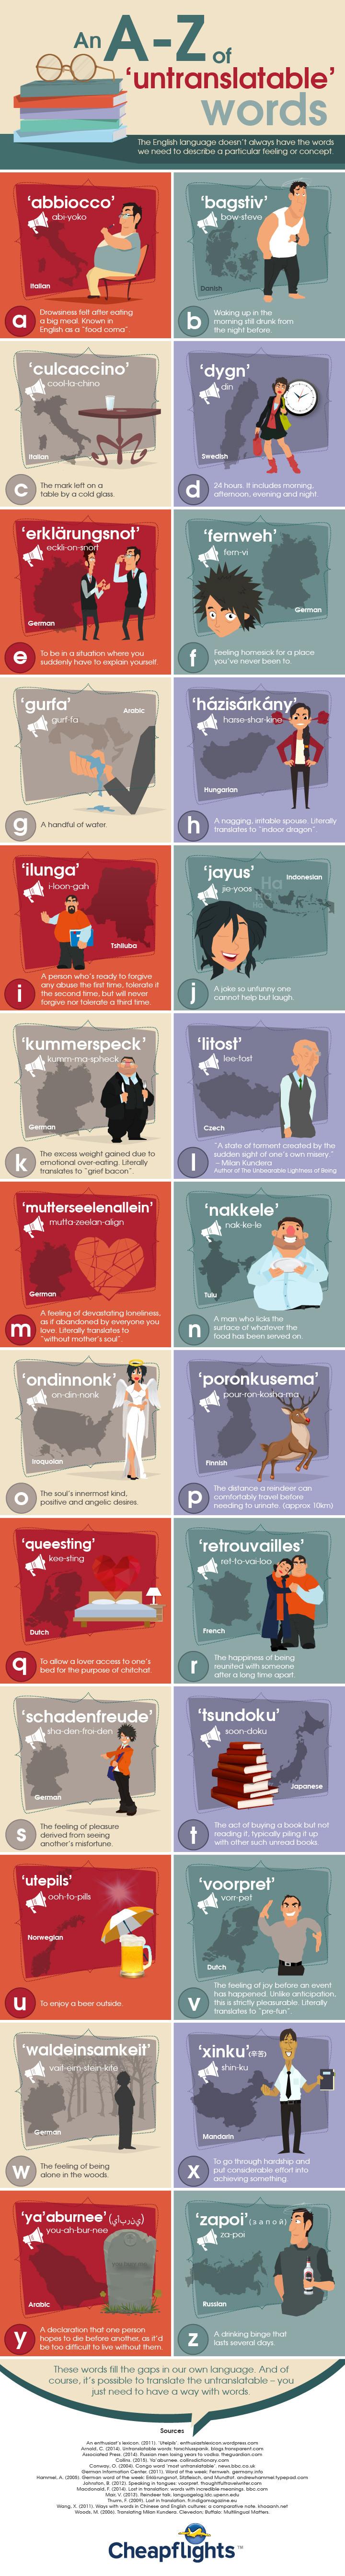 an-a-z-of-untranslatable-words